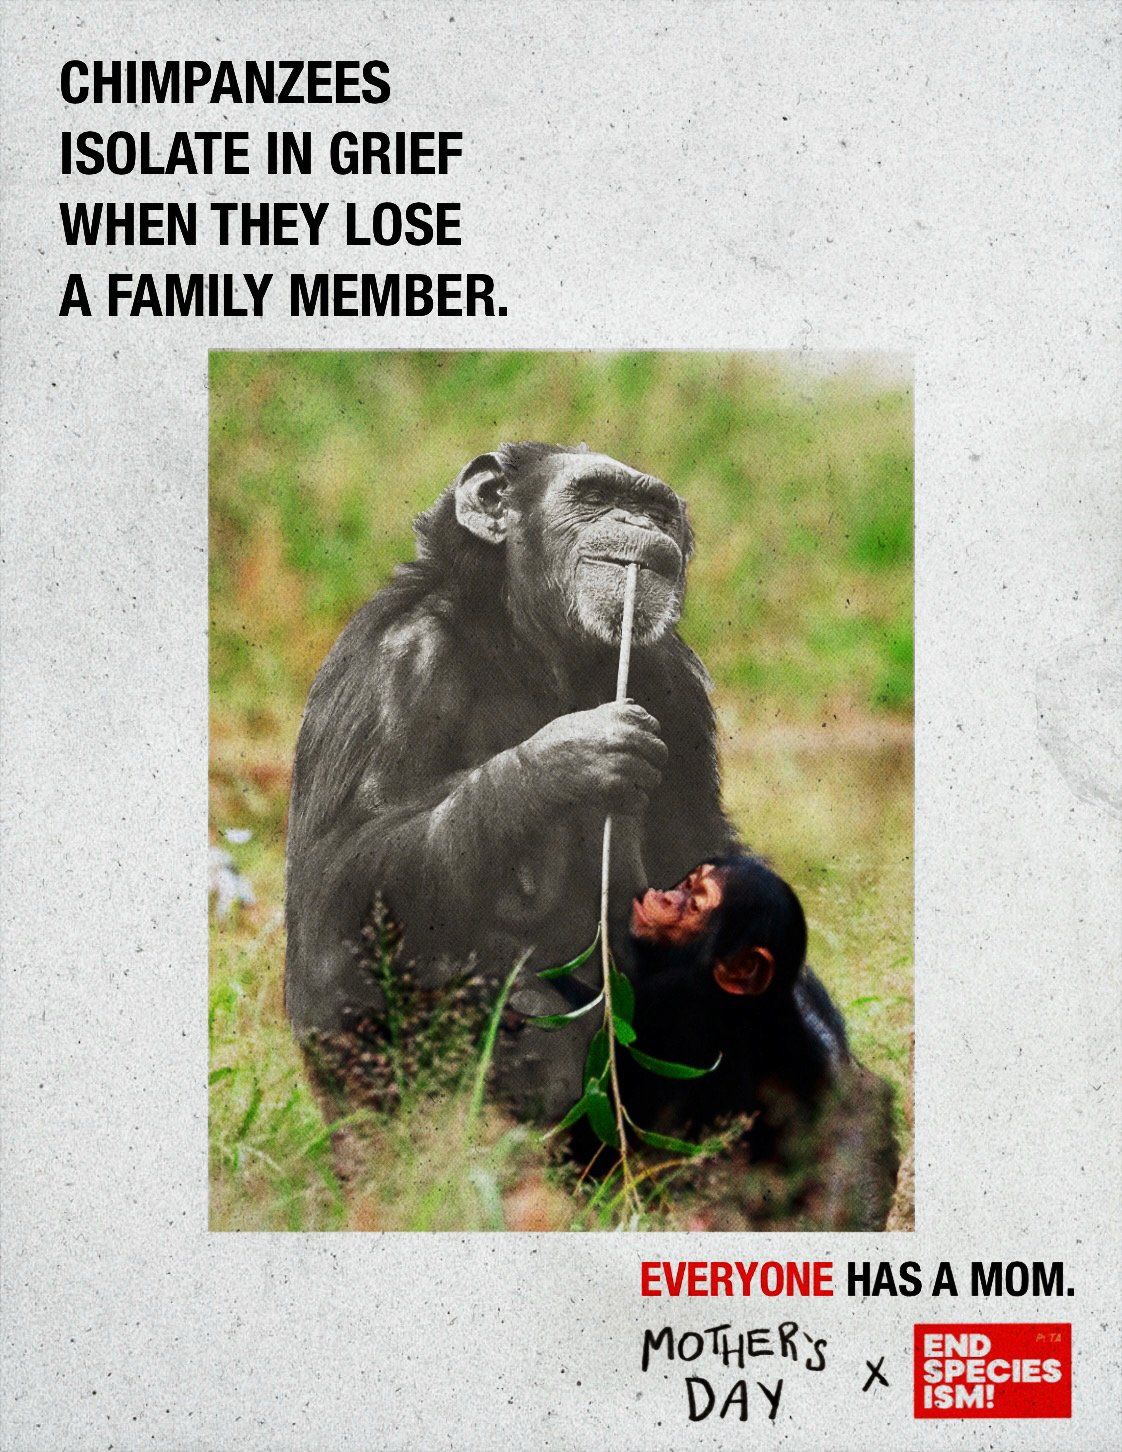 Print ad featuring a photo of a chimpanzee and her child. The text reads "chimpanzees isolate in grief when they lose a family member" and the bottom text reads "everyone has a mom"